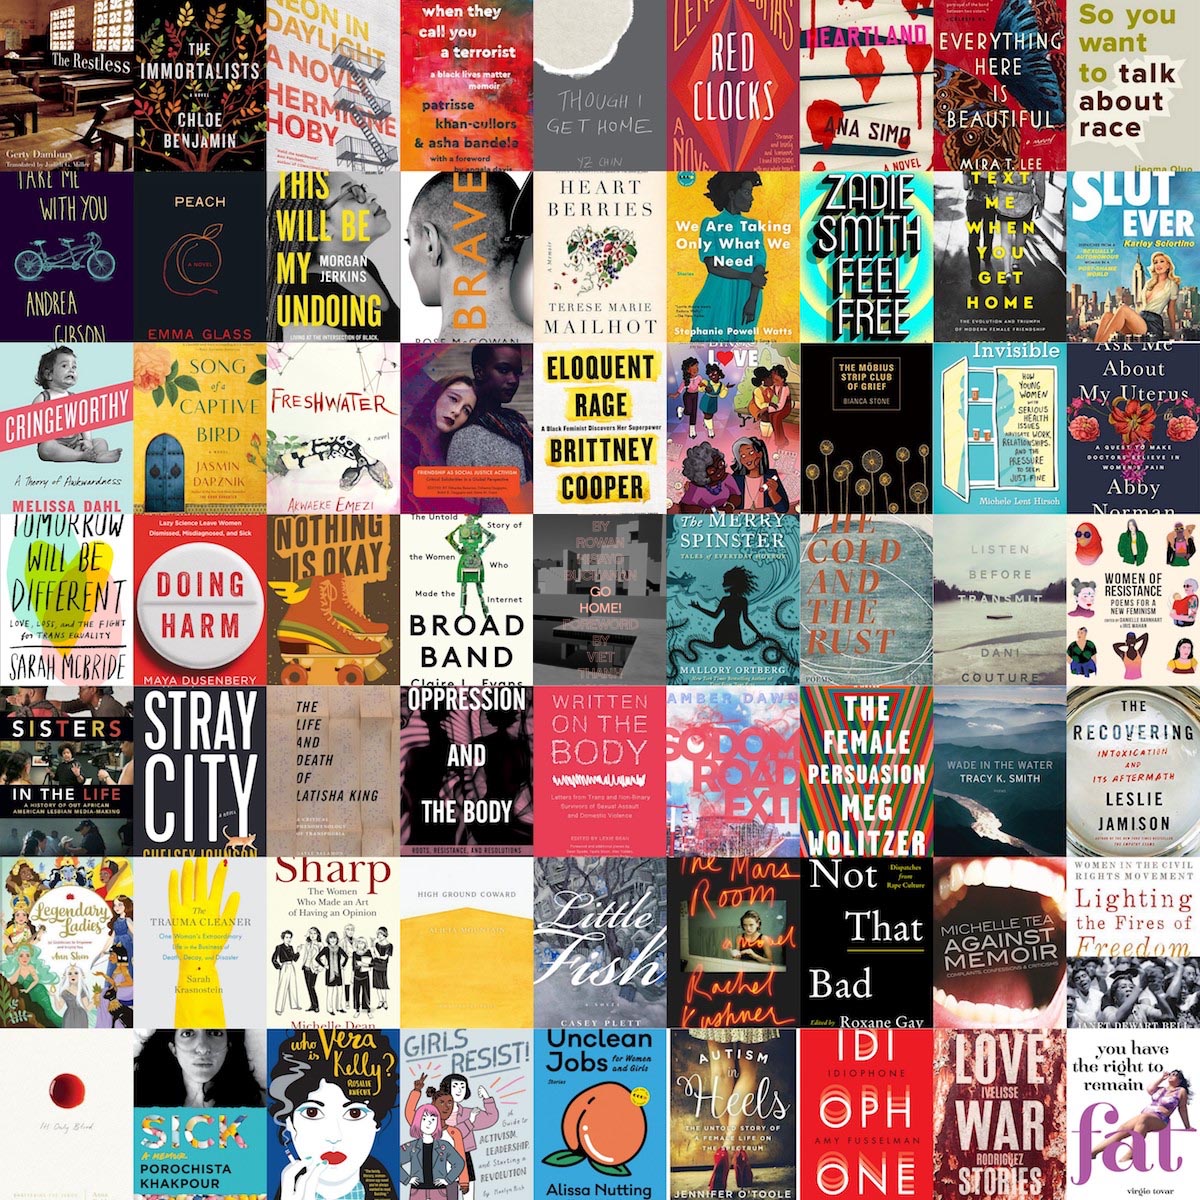 65 Queer and Feminist Books To Read In 2018 | Autostraddle